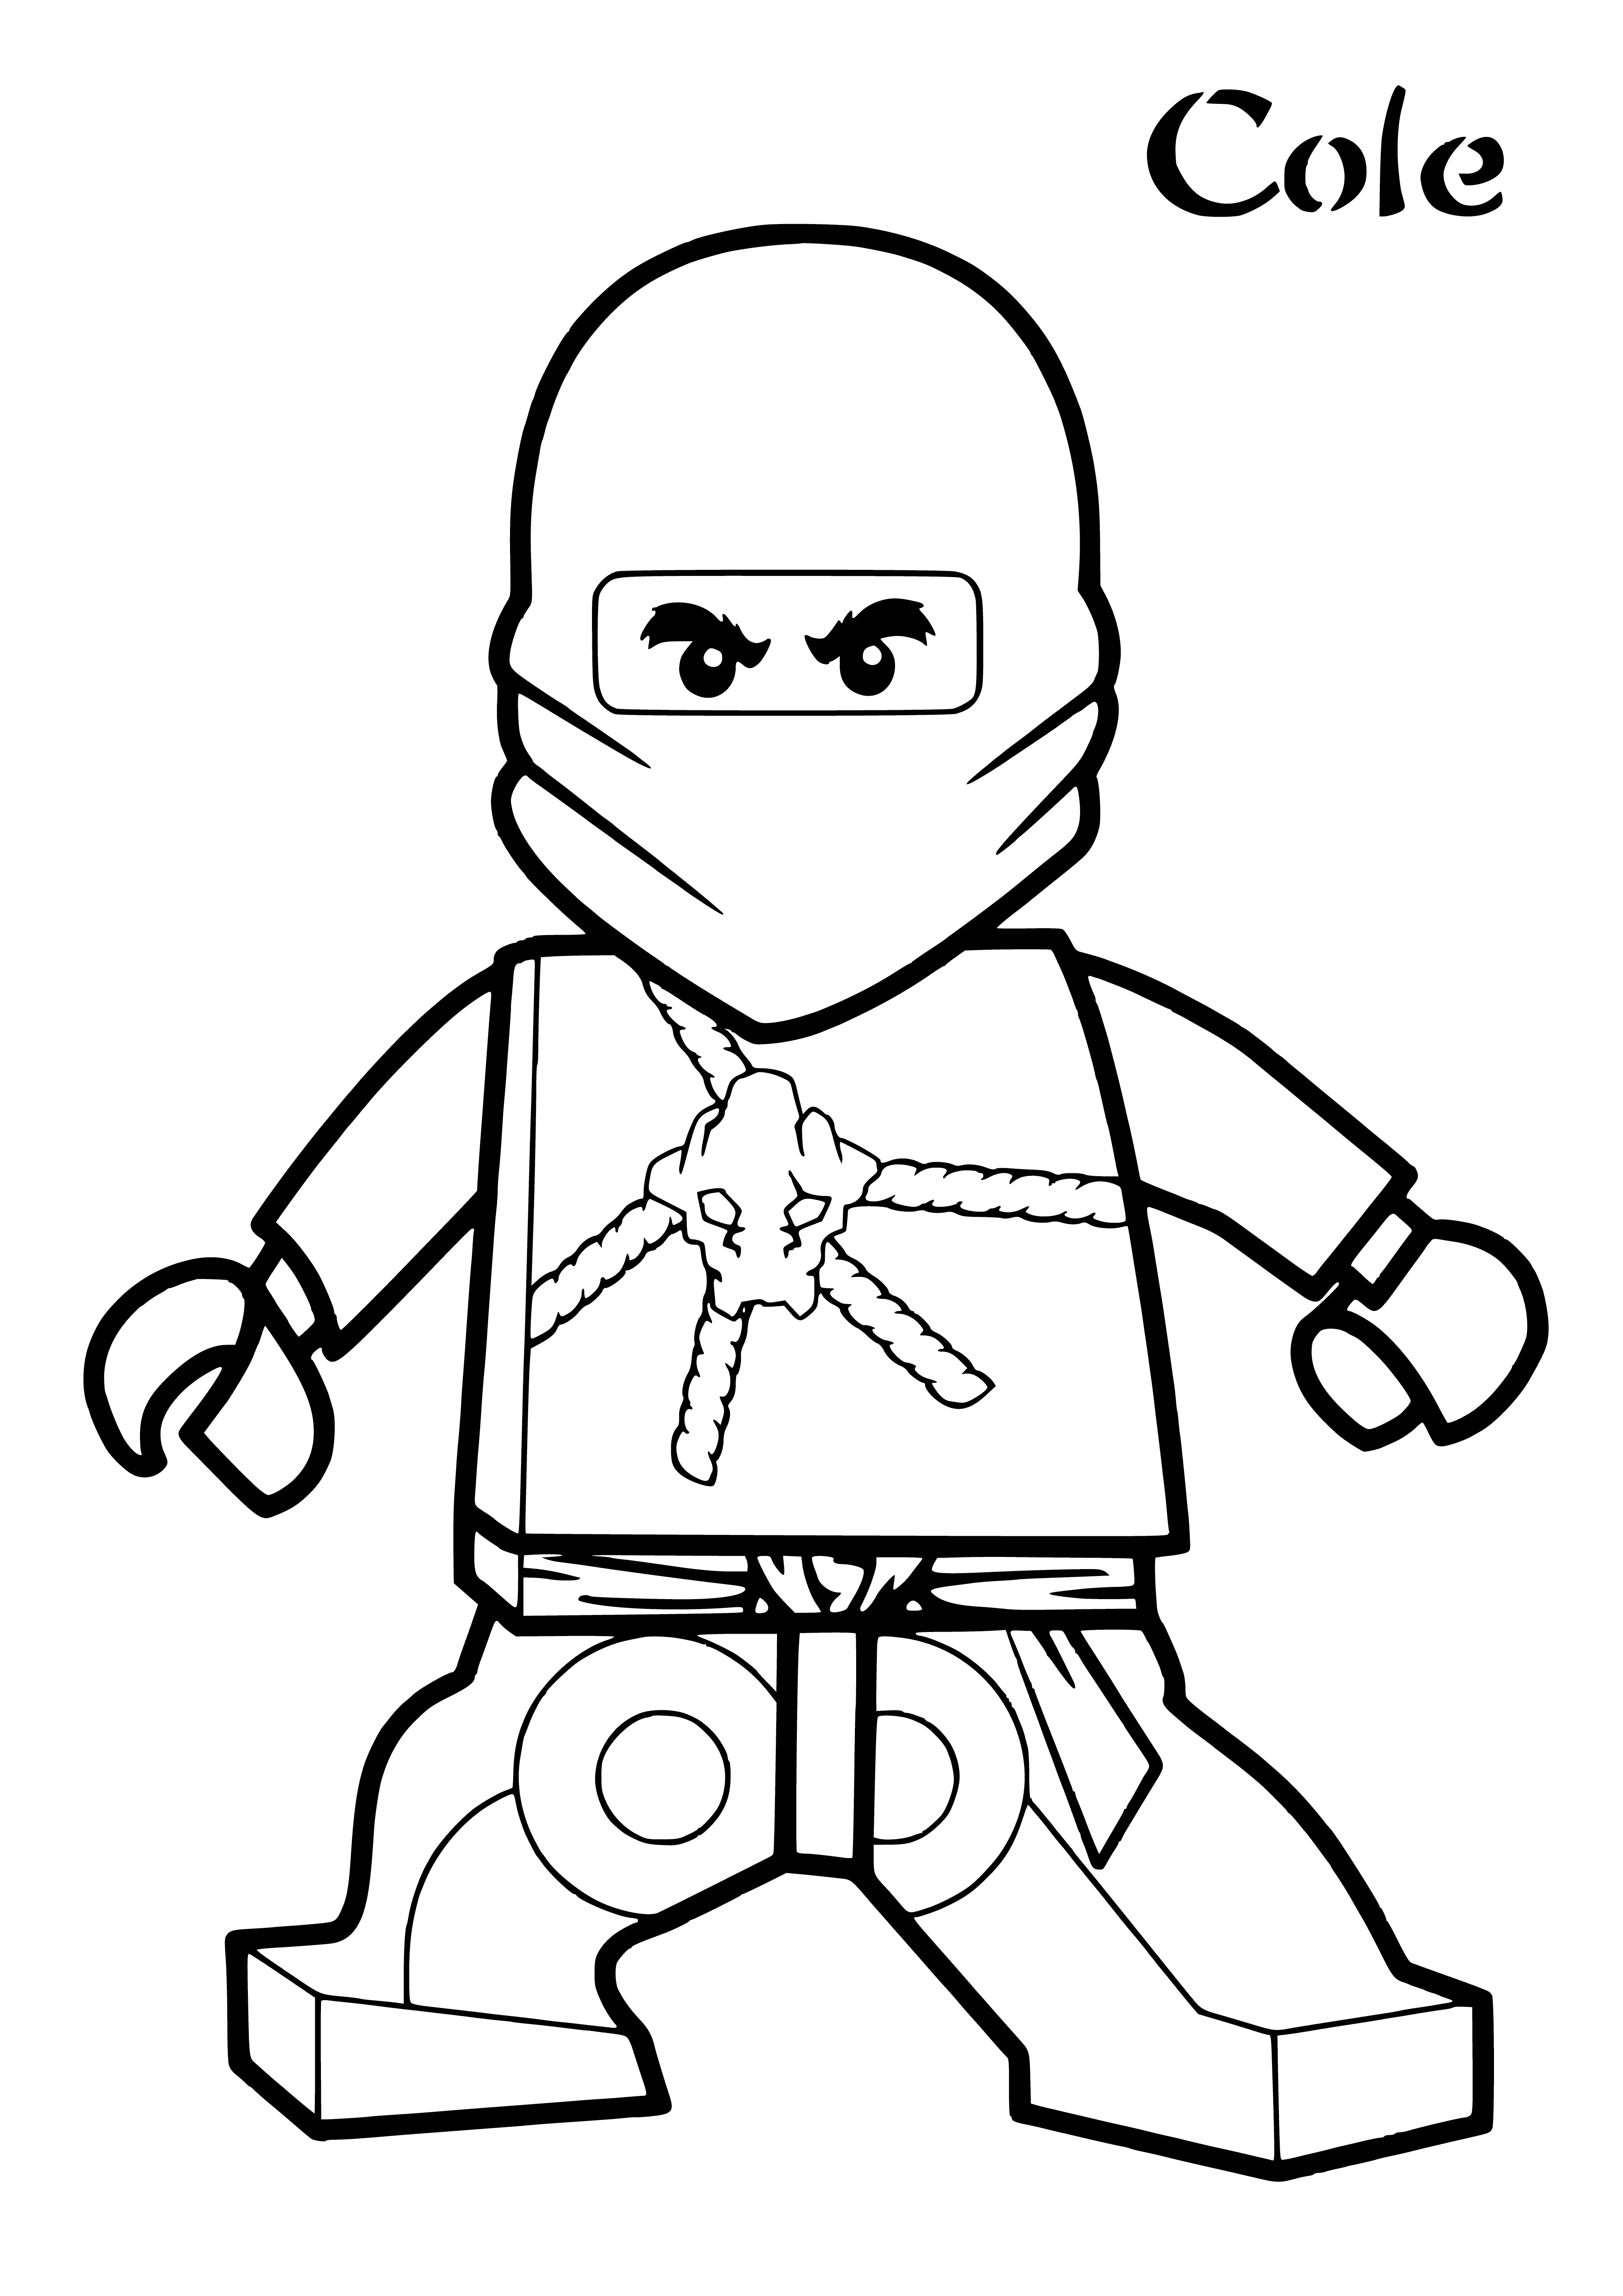 coloring page: LEGO figure of ninja w/ mask, cloak & swords standing on brick--perfect for imaginative play!